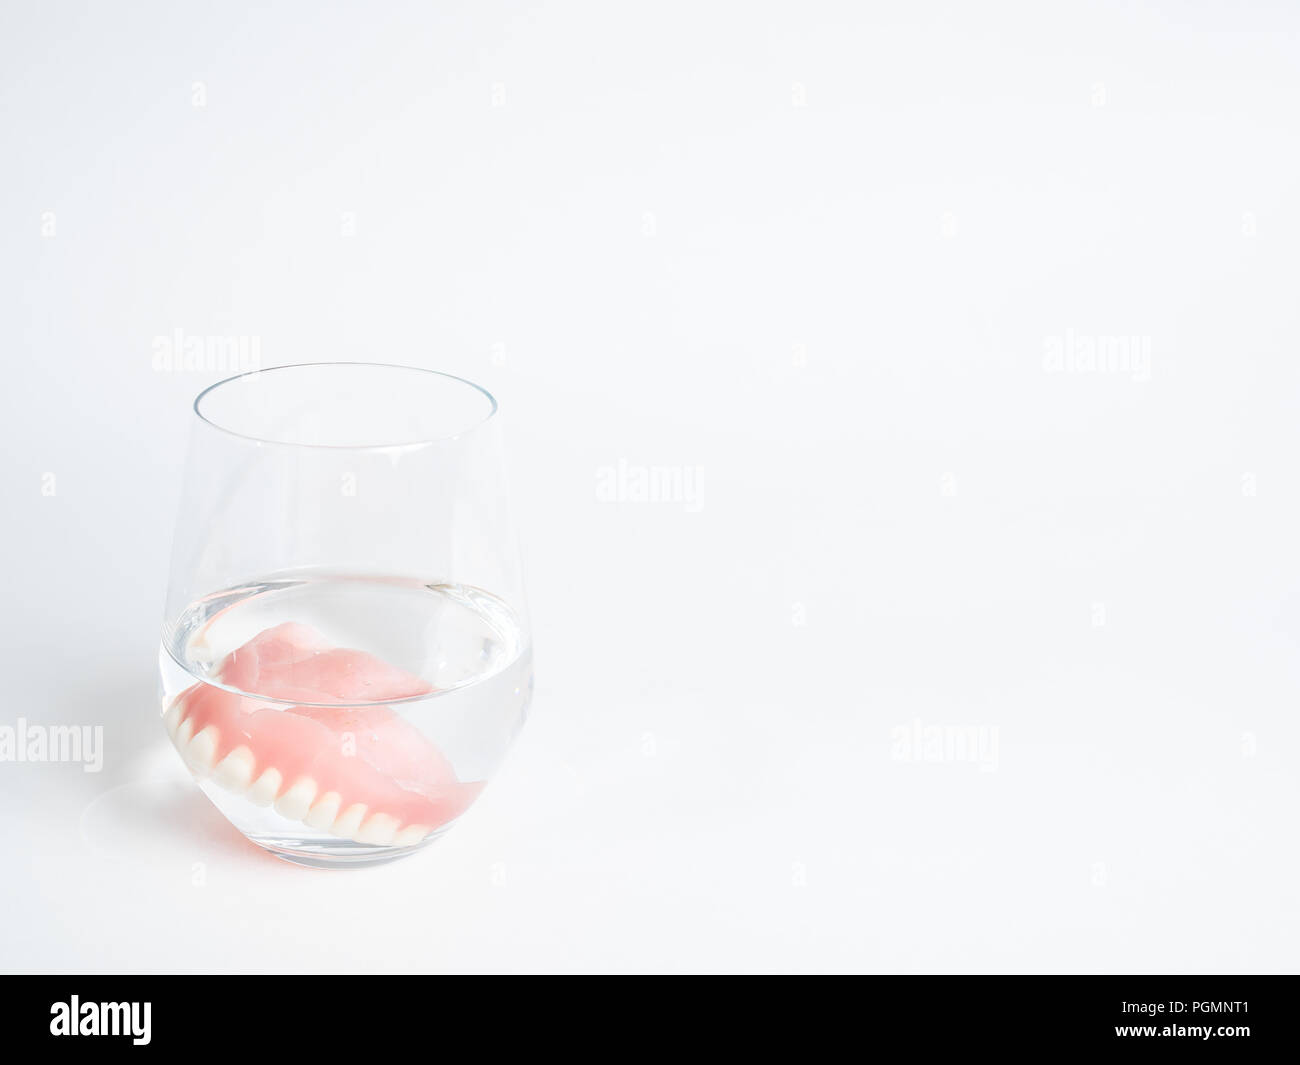 False Teeth Glass High Resolution Stock Photography and Images - Alamy